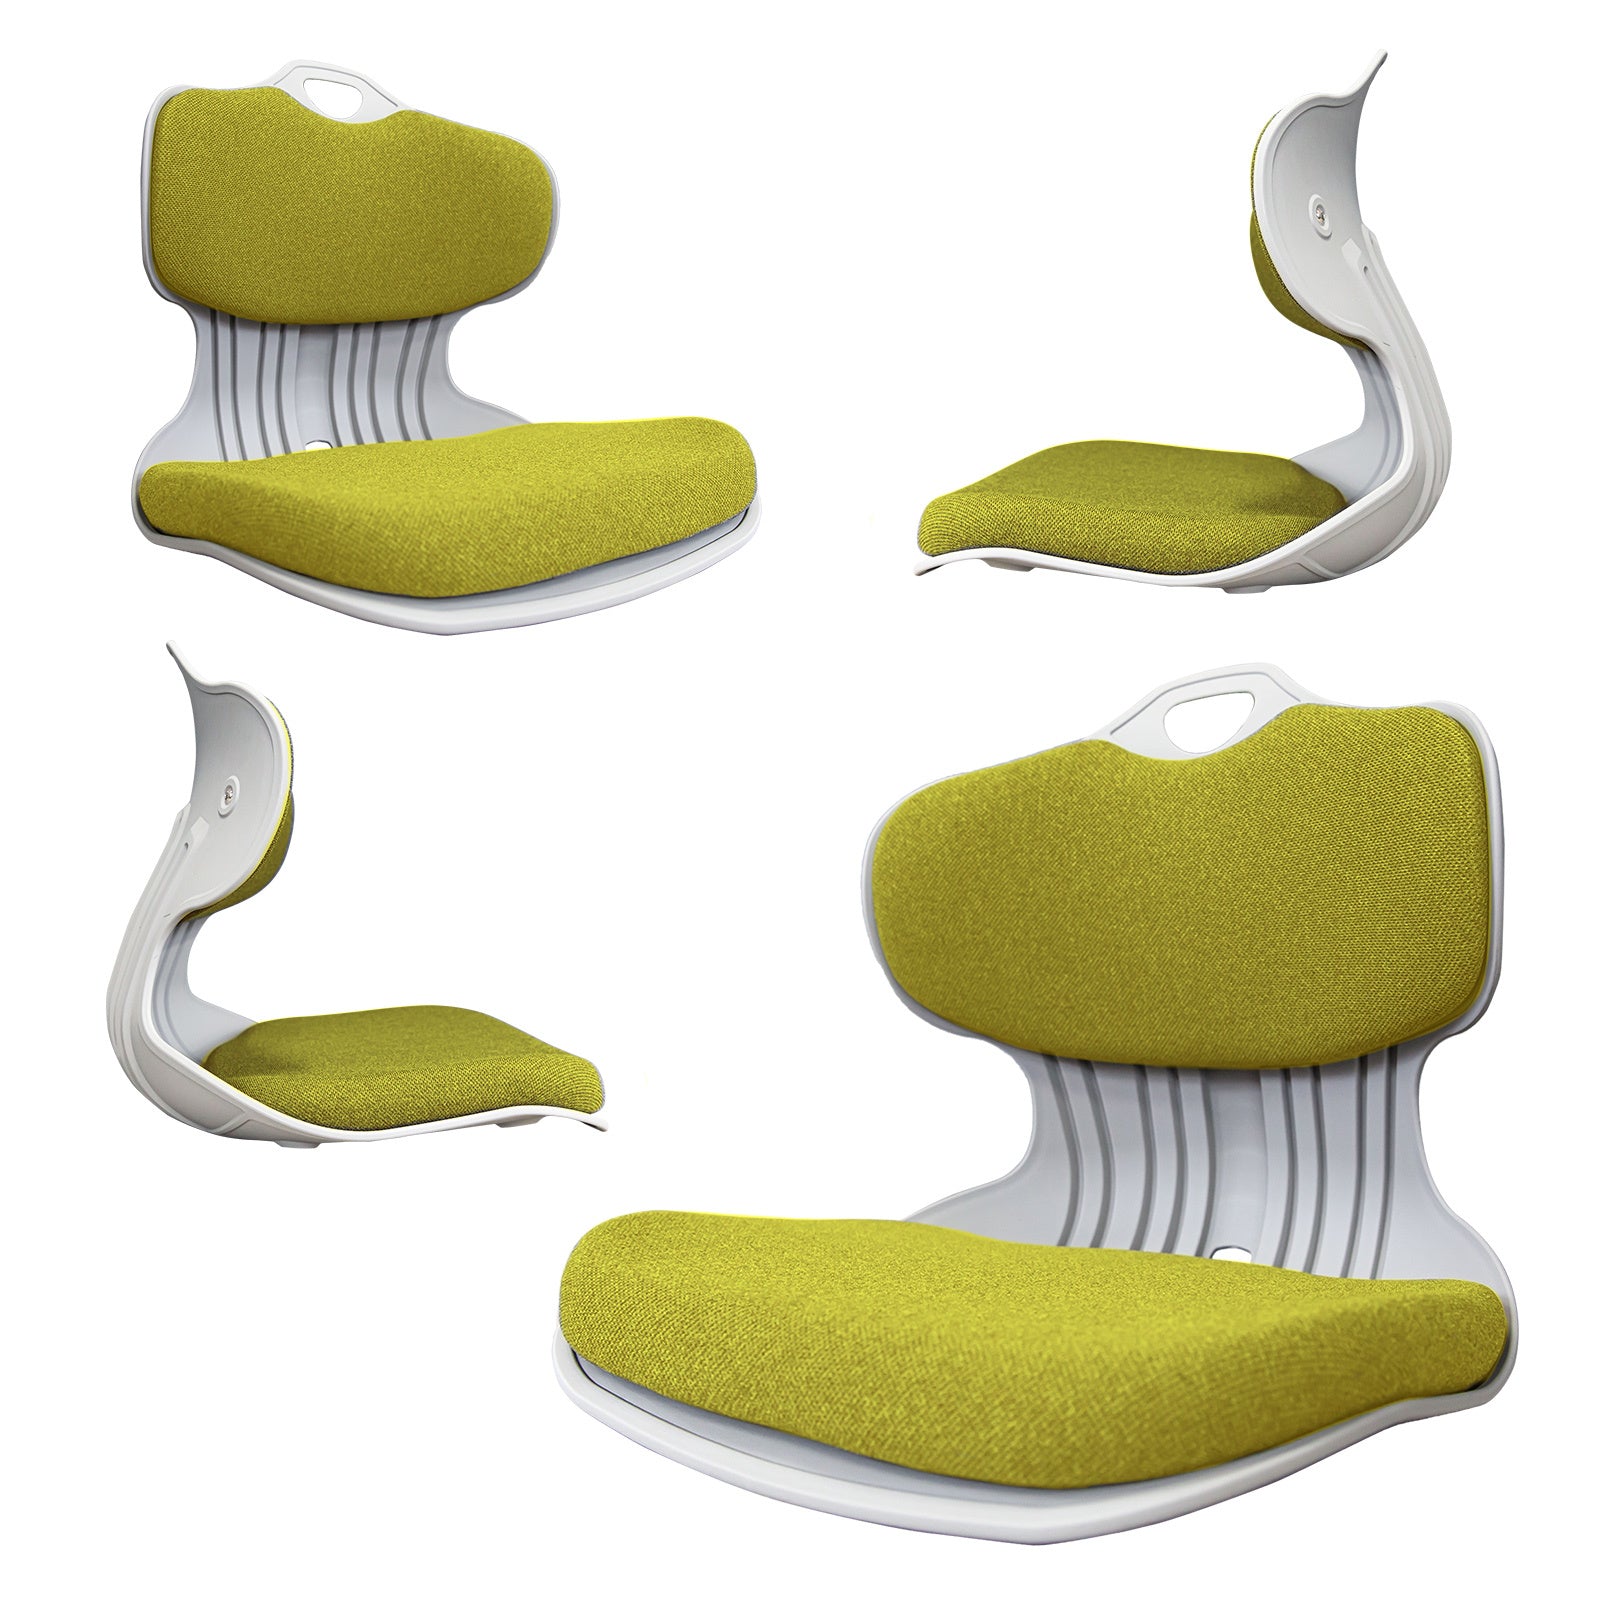 Samgong Posture Correction Slender Chair in Lime Set - 4 Pieces - Notbrand